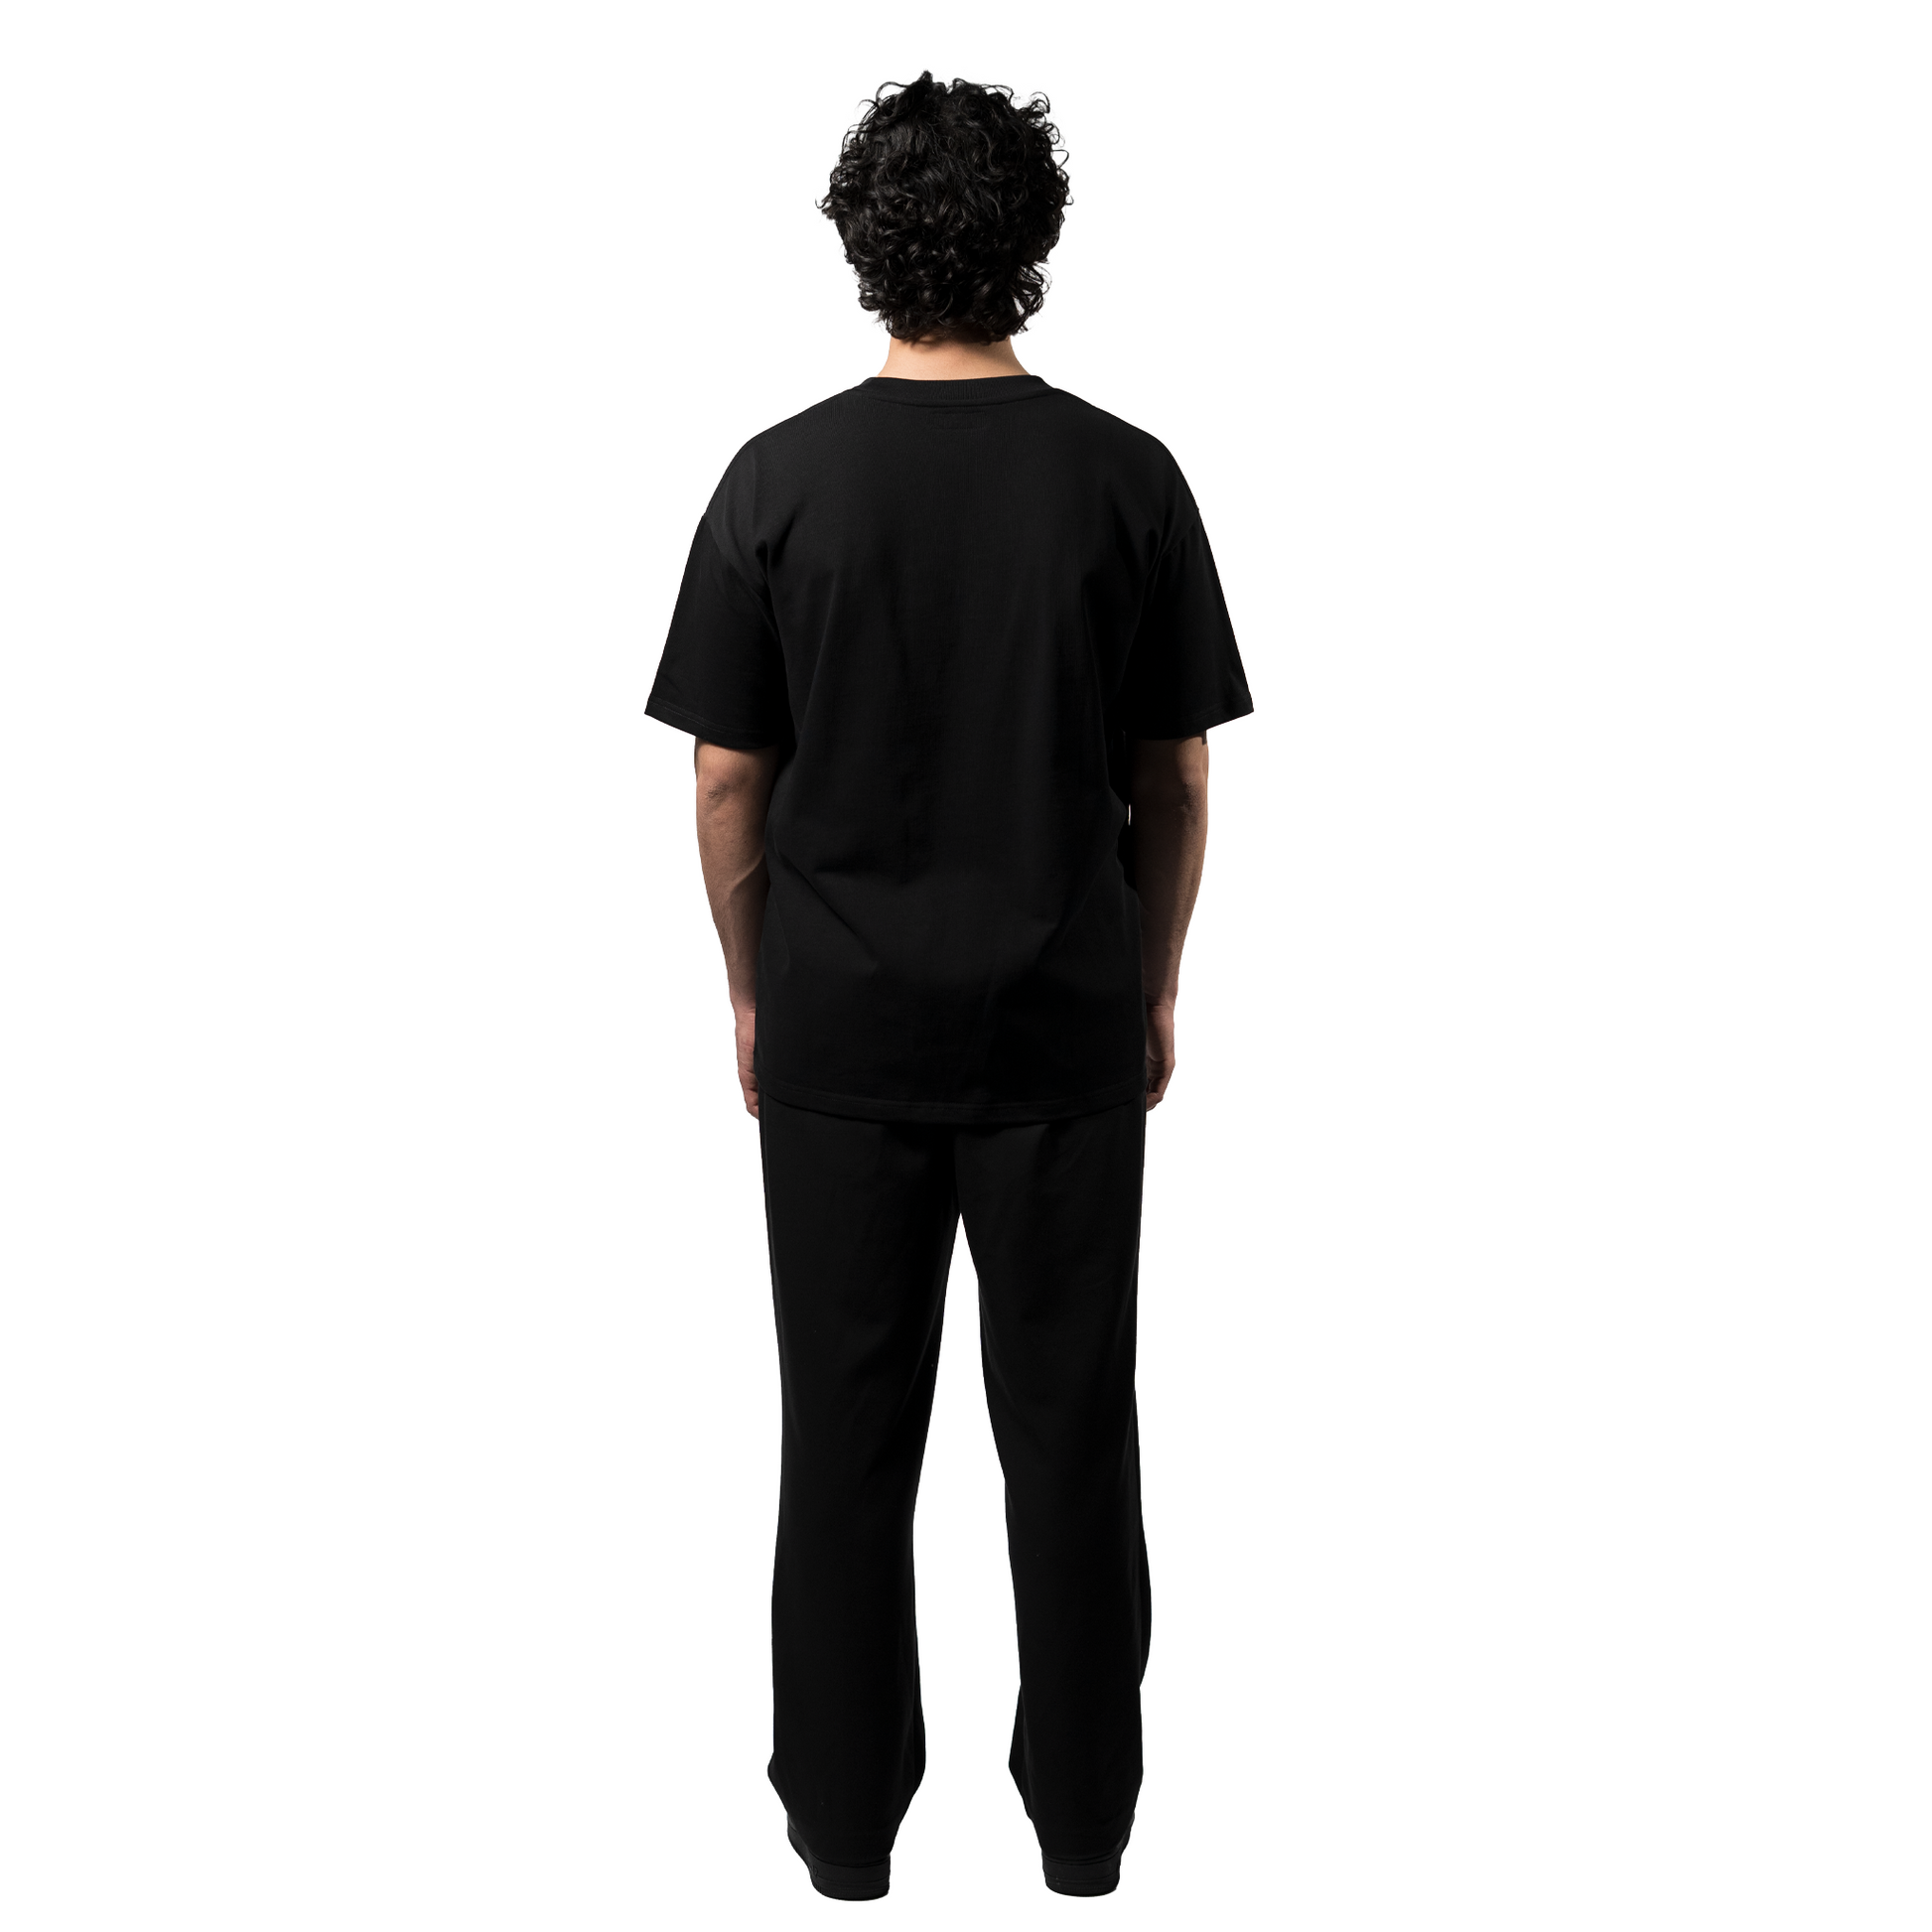 A back view of an model showcasing an elegant black oversized T-shirt, paired with matching black trousers and shoes, highlighting the brand's sleek elegance and luxury.